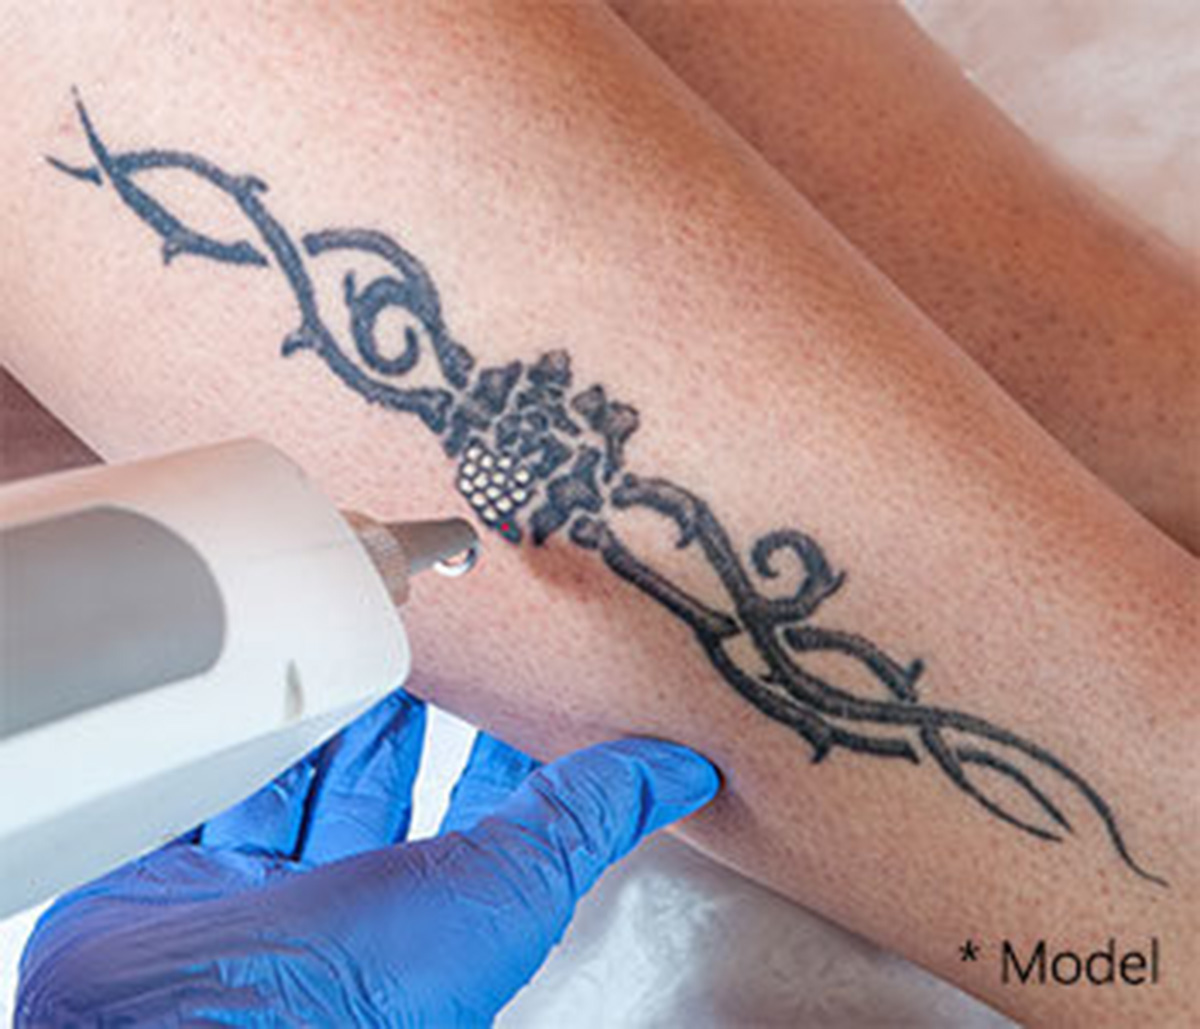 Learn more about tattoo removal in Beverly Hills